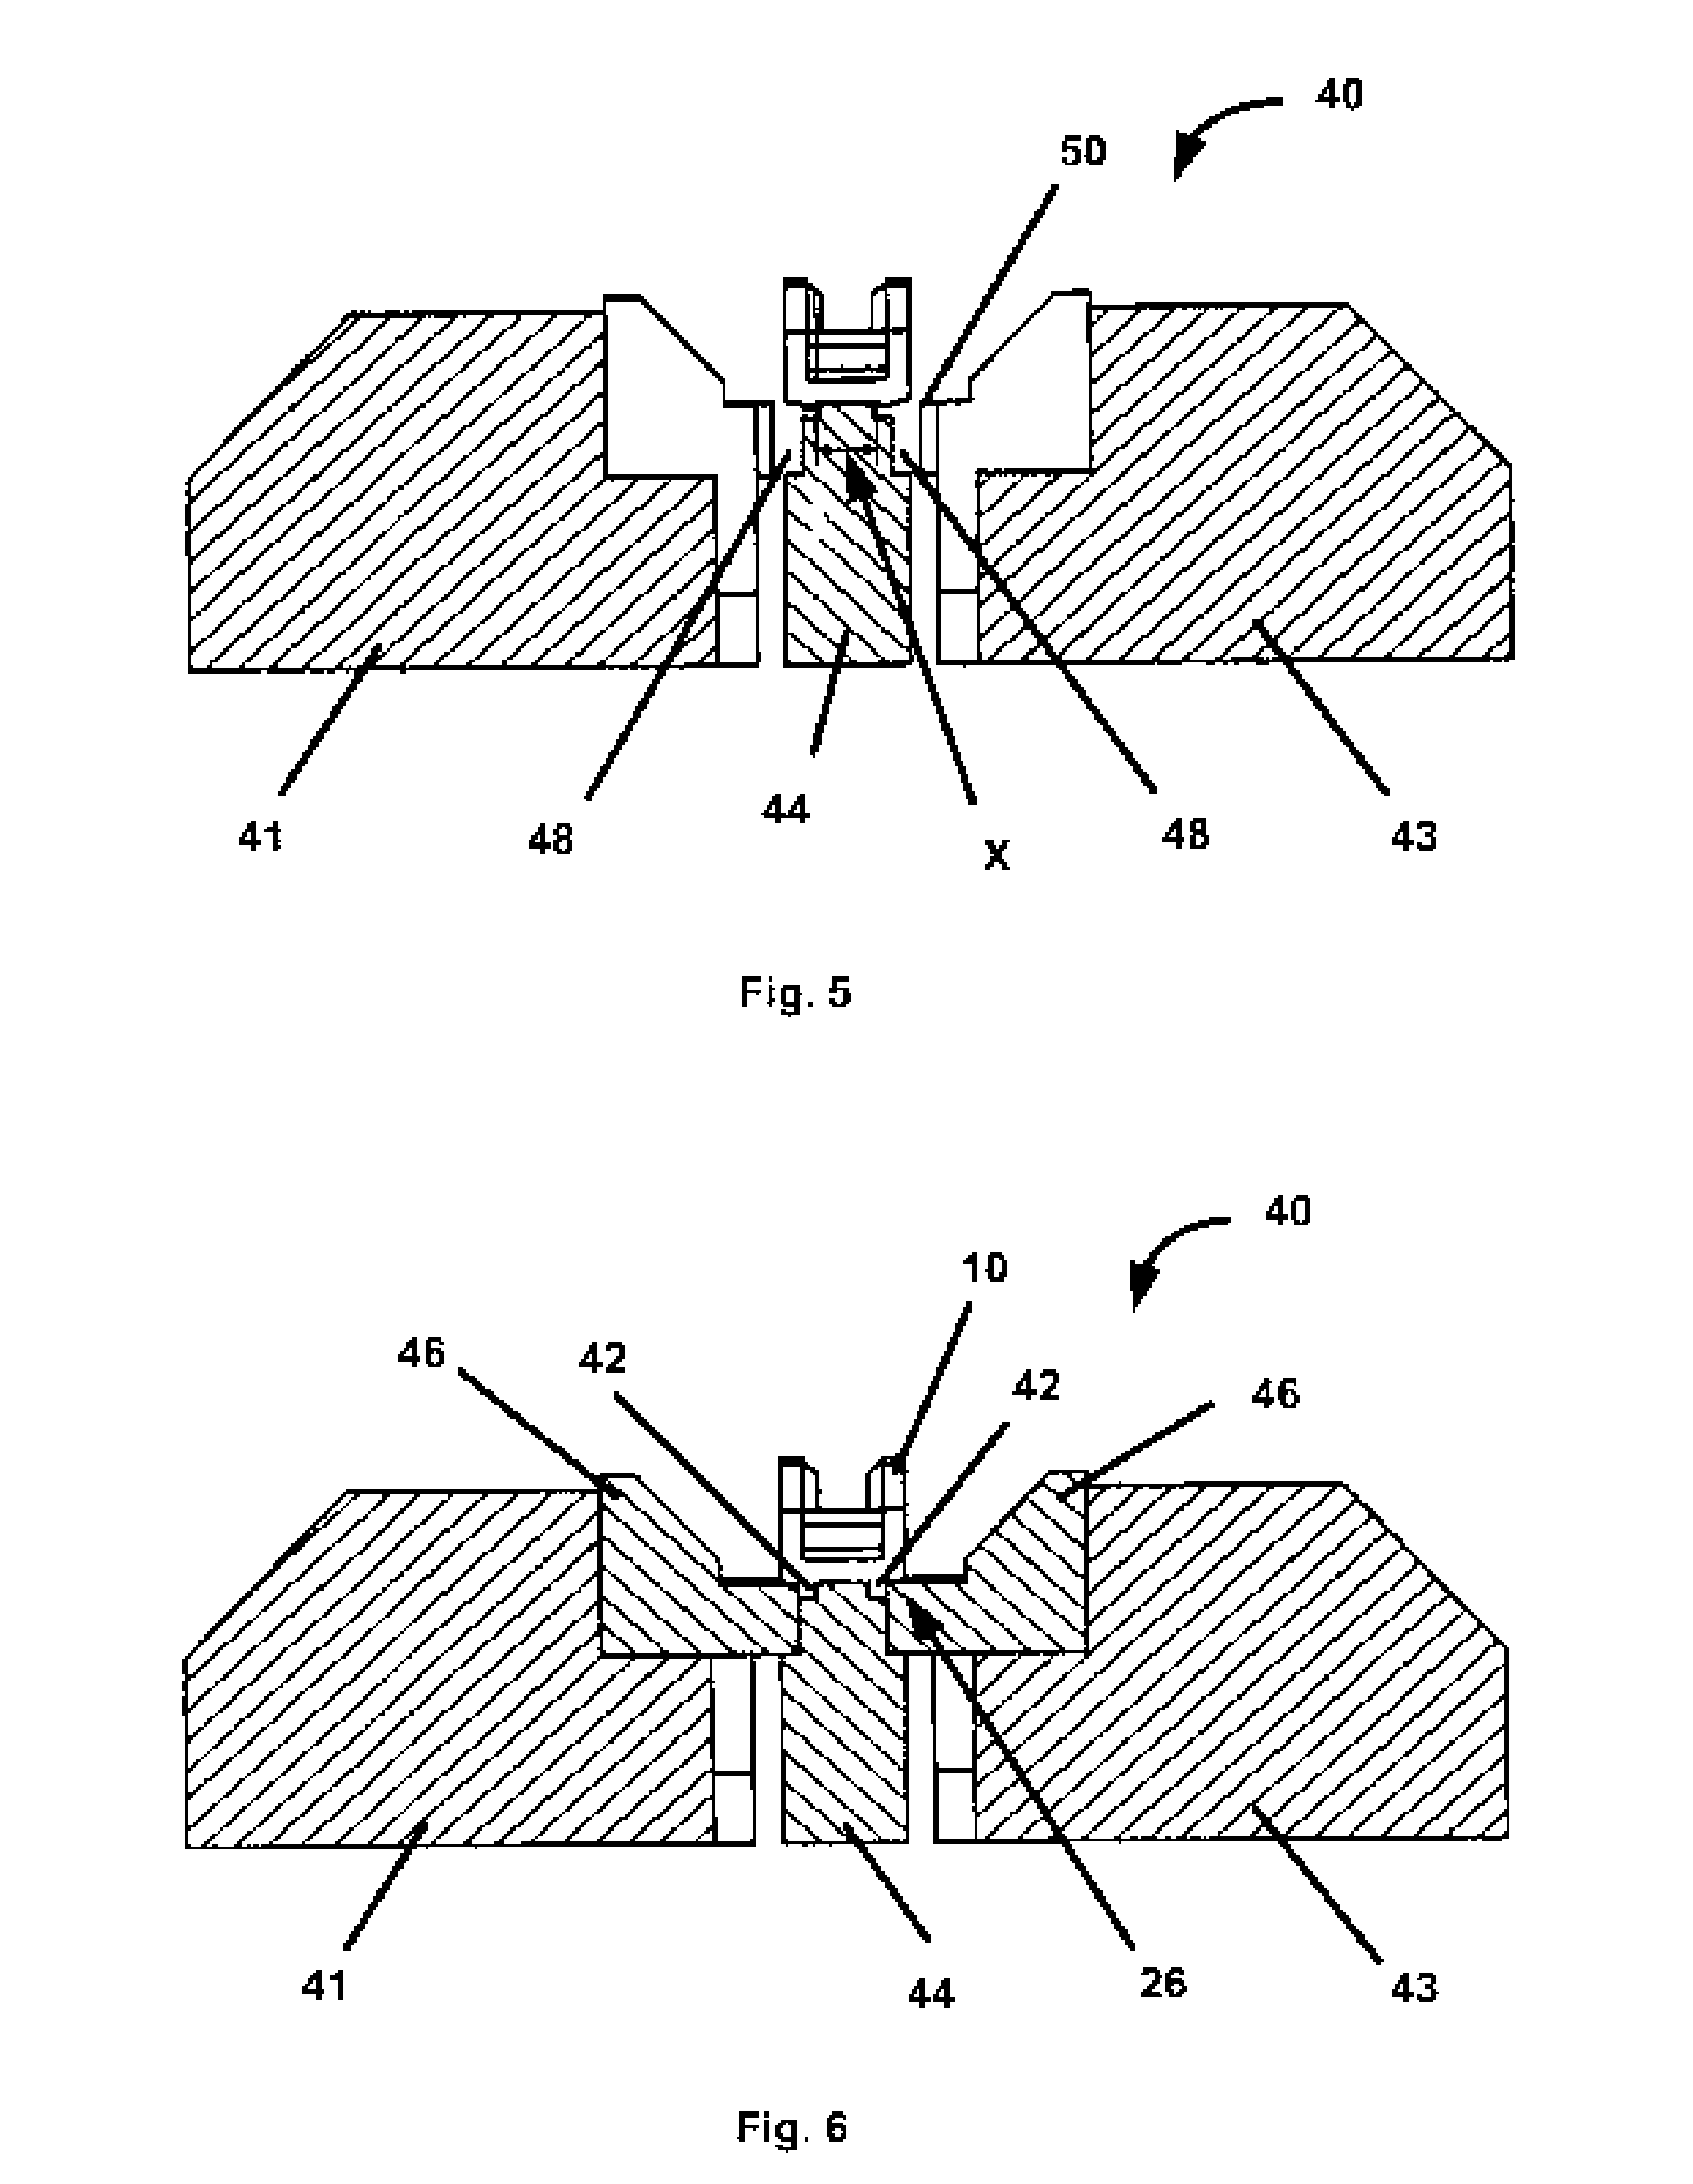 Method for Forming a Cam-Engaged Rocker Arm